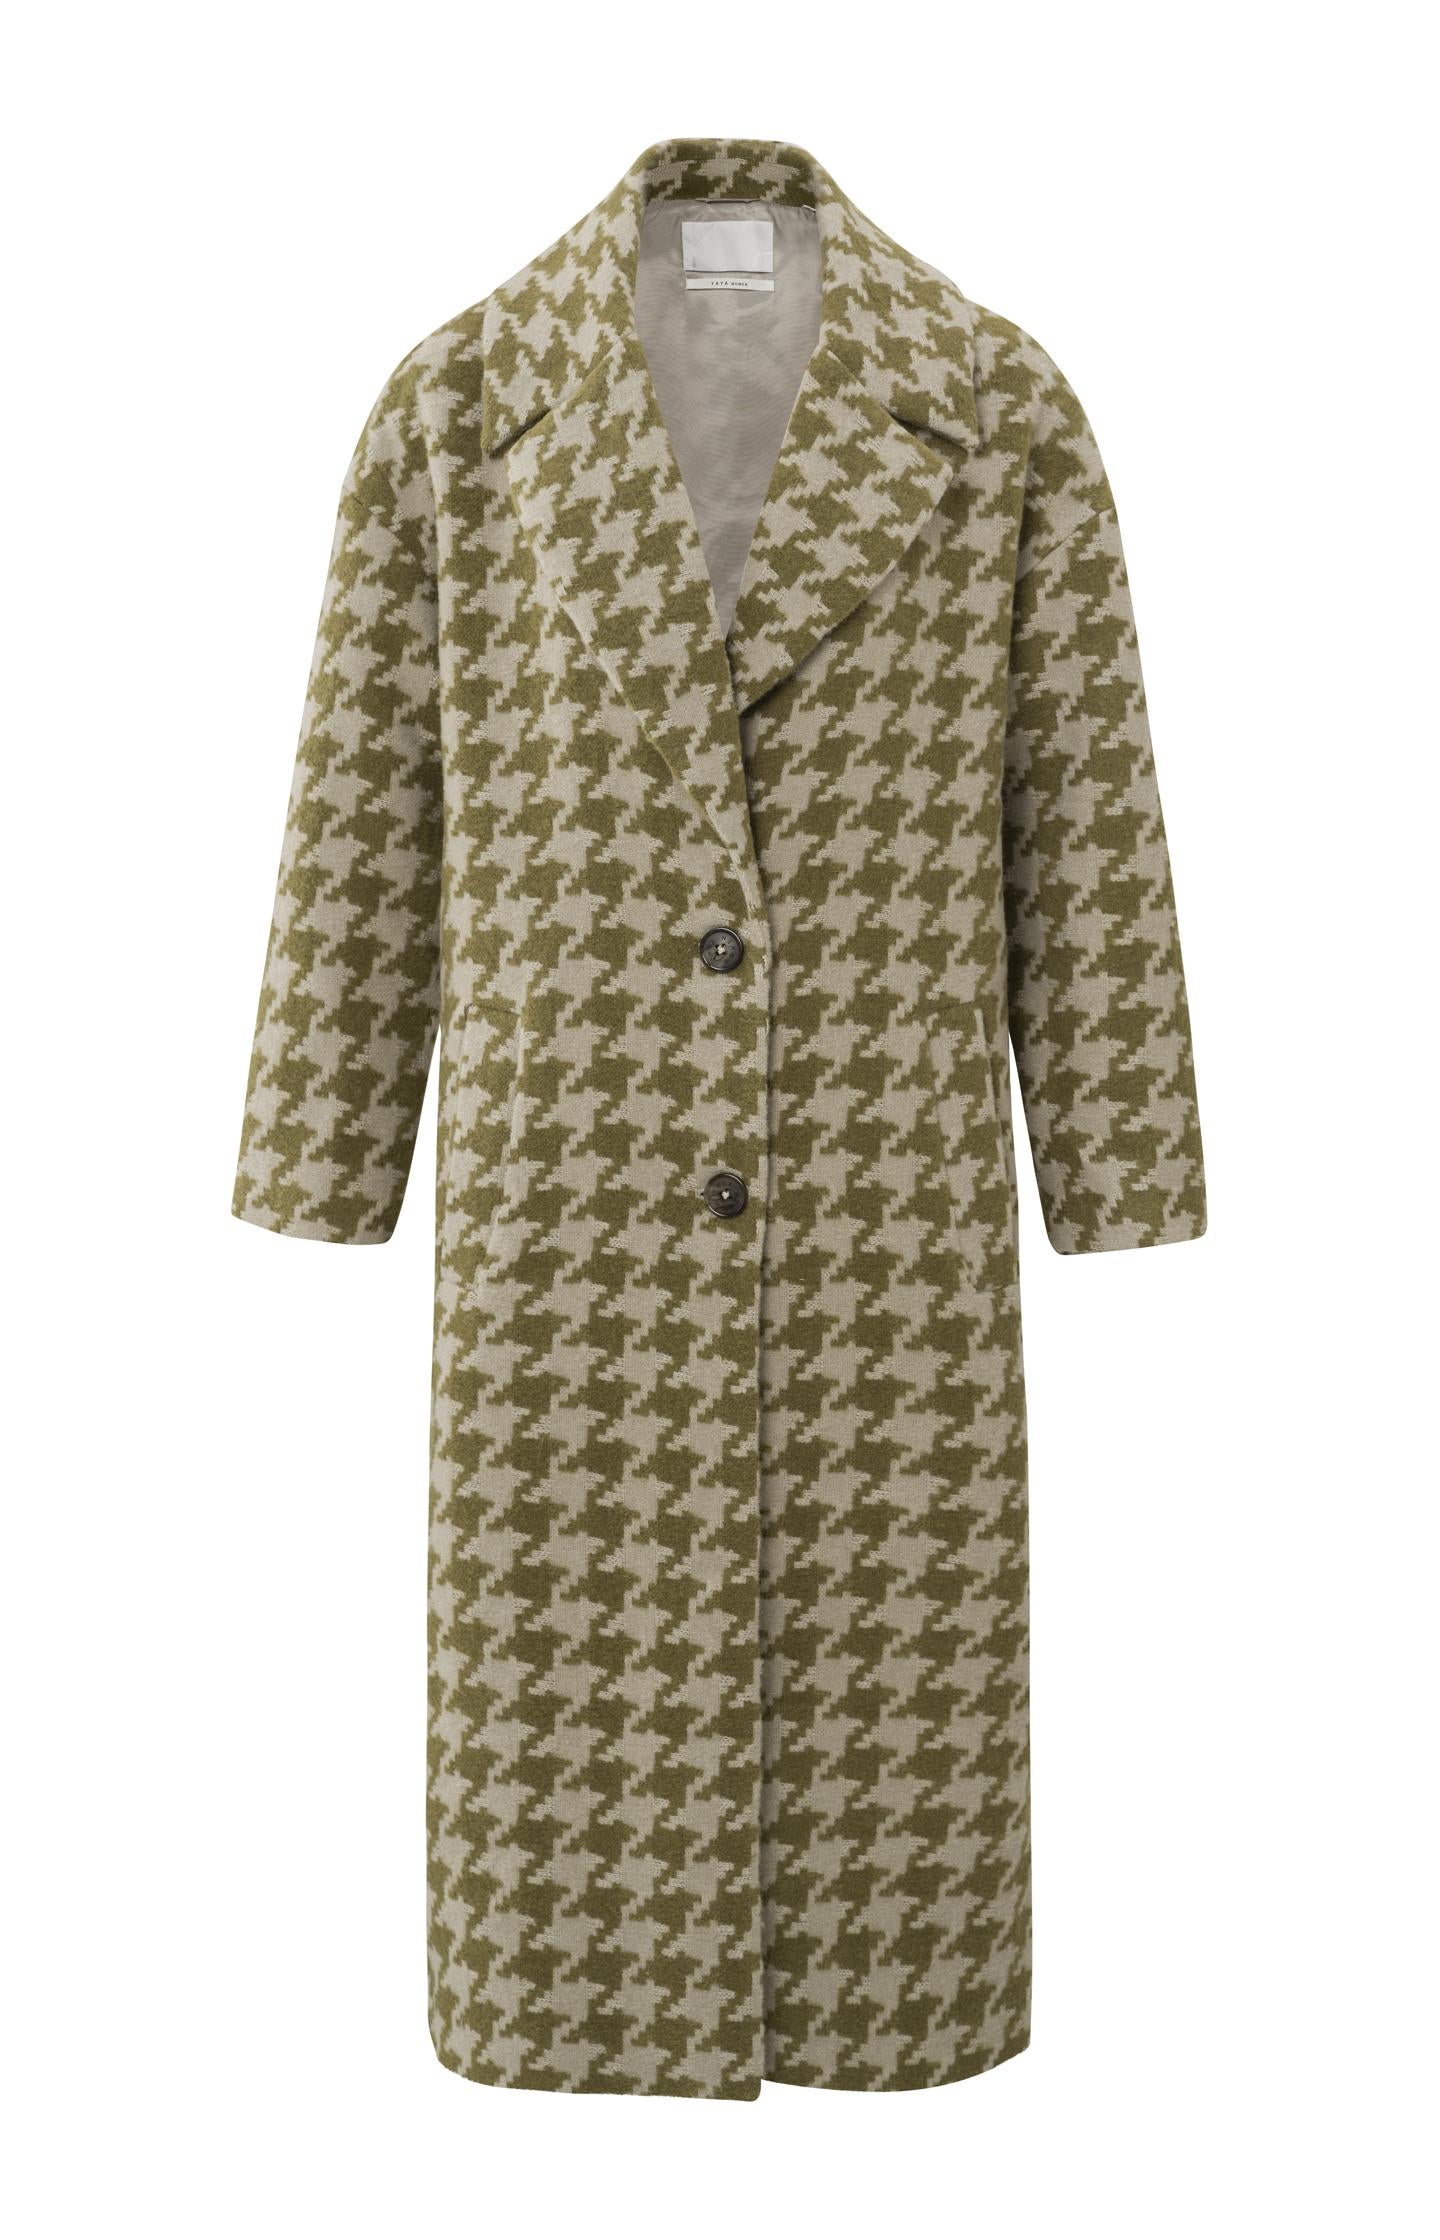 Houndstooth coat with long sleeves, pockets and buttons - Type: product